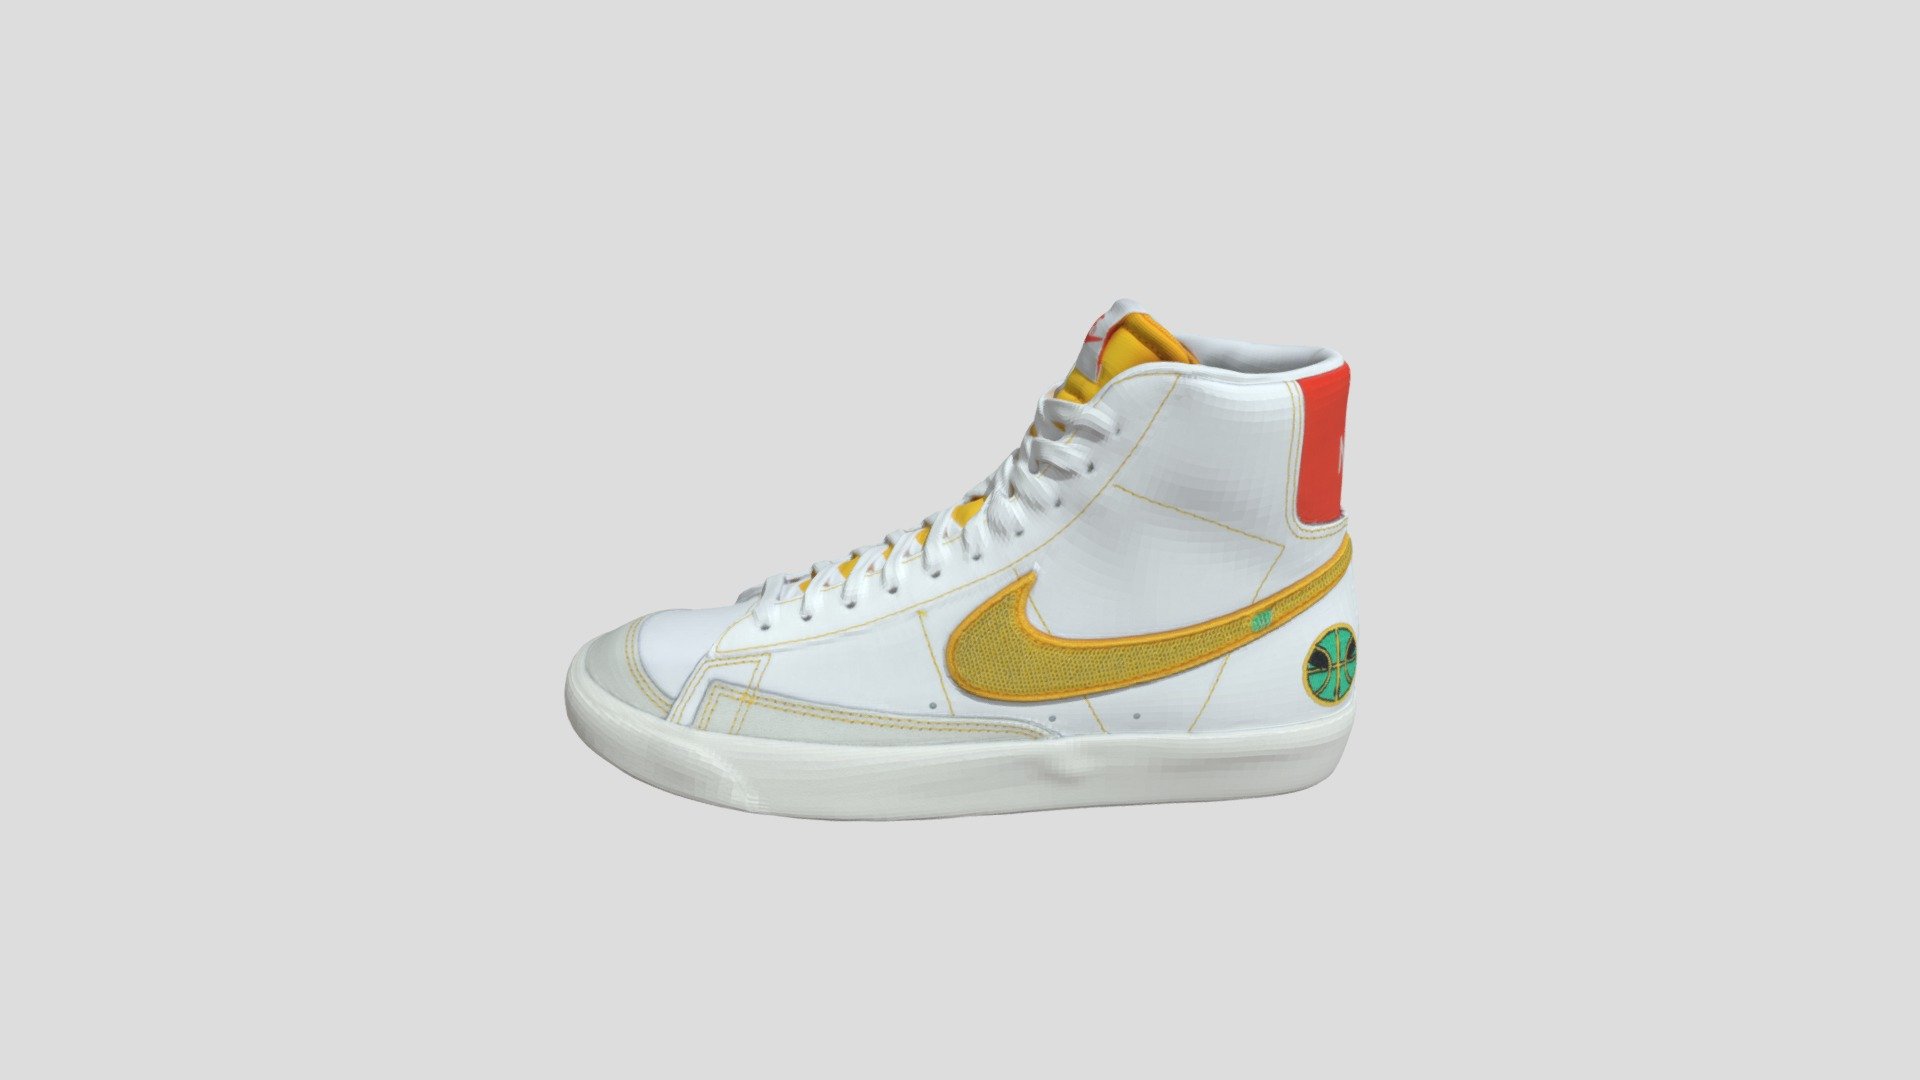 This model was created firstly by 3D scanning on retail version, and then being detail-improved manually, thus a 1:1 repulica of the original
PBR ready
Low-poly
4K texture
Welcome to check out other models we have to offer. And we do accept custom orders as well :) - Nike Blazer Mid RayGuns (GS) 外星人 白黄绿_DD9528-100 - Buy Royalty Free 3D model by TRARGUS 3d model